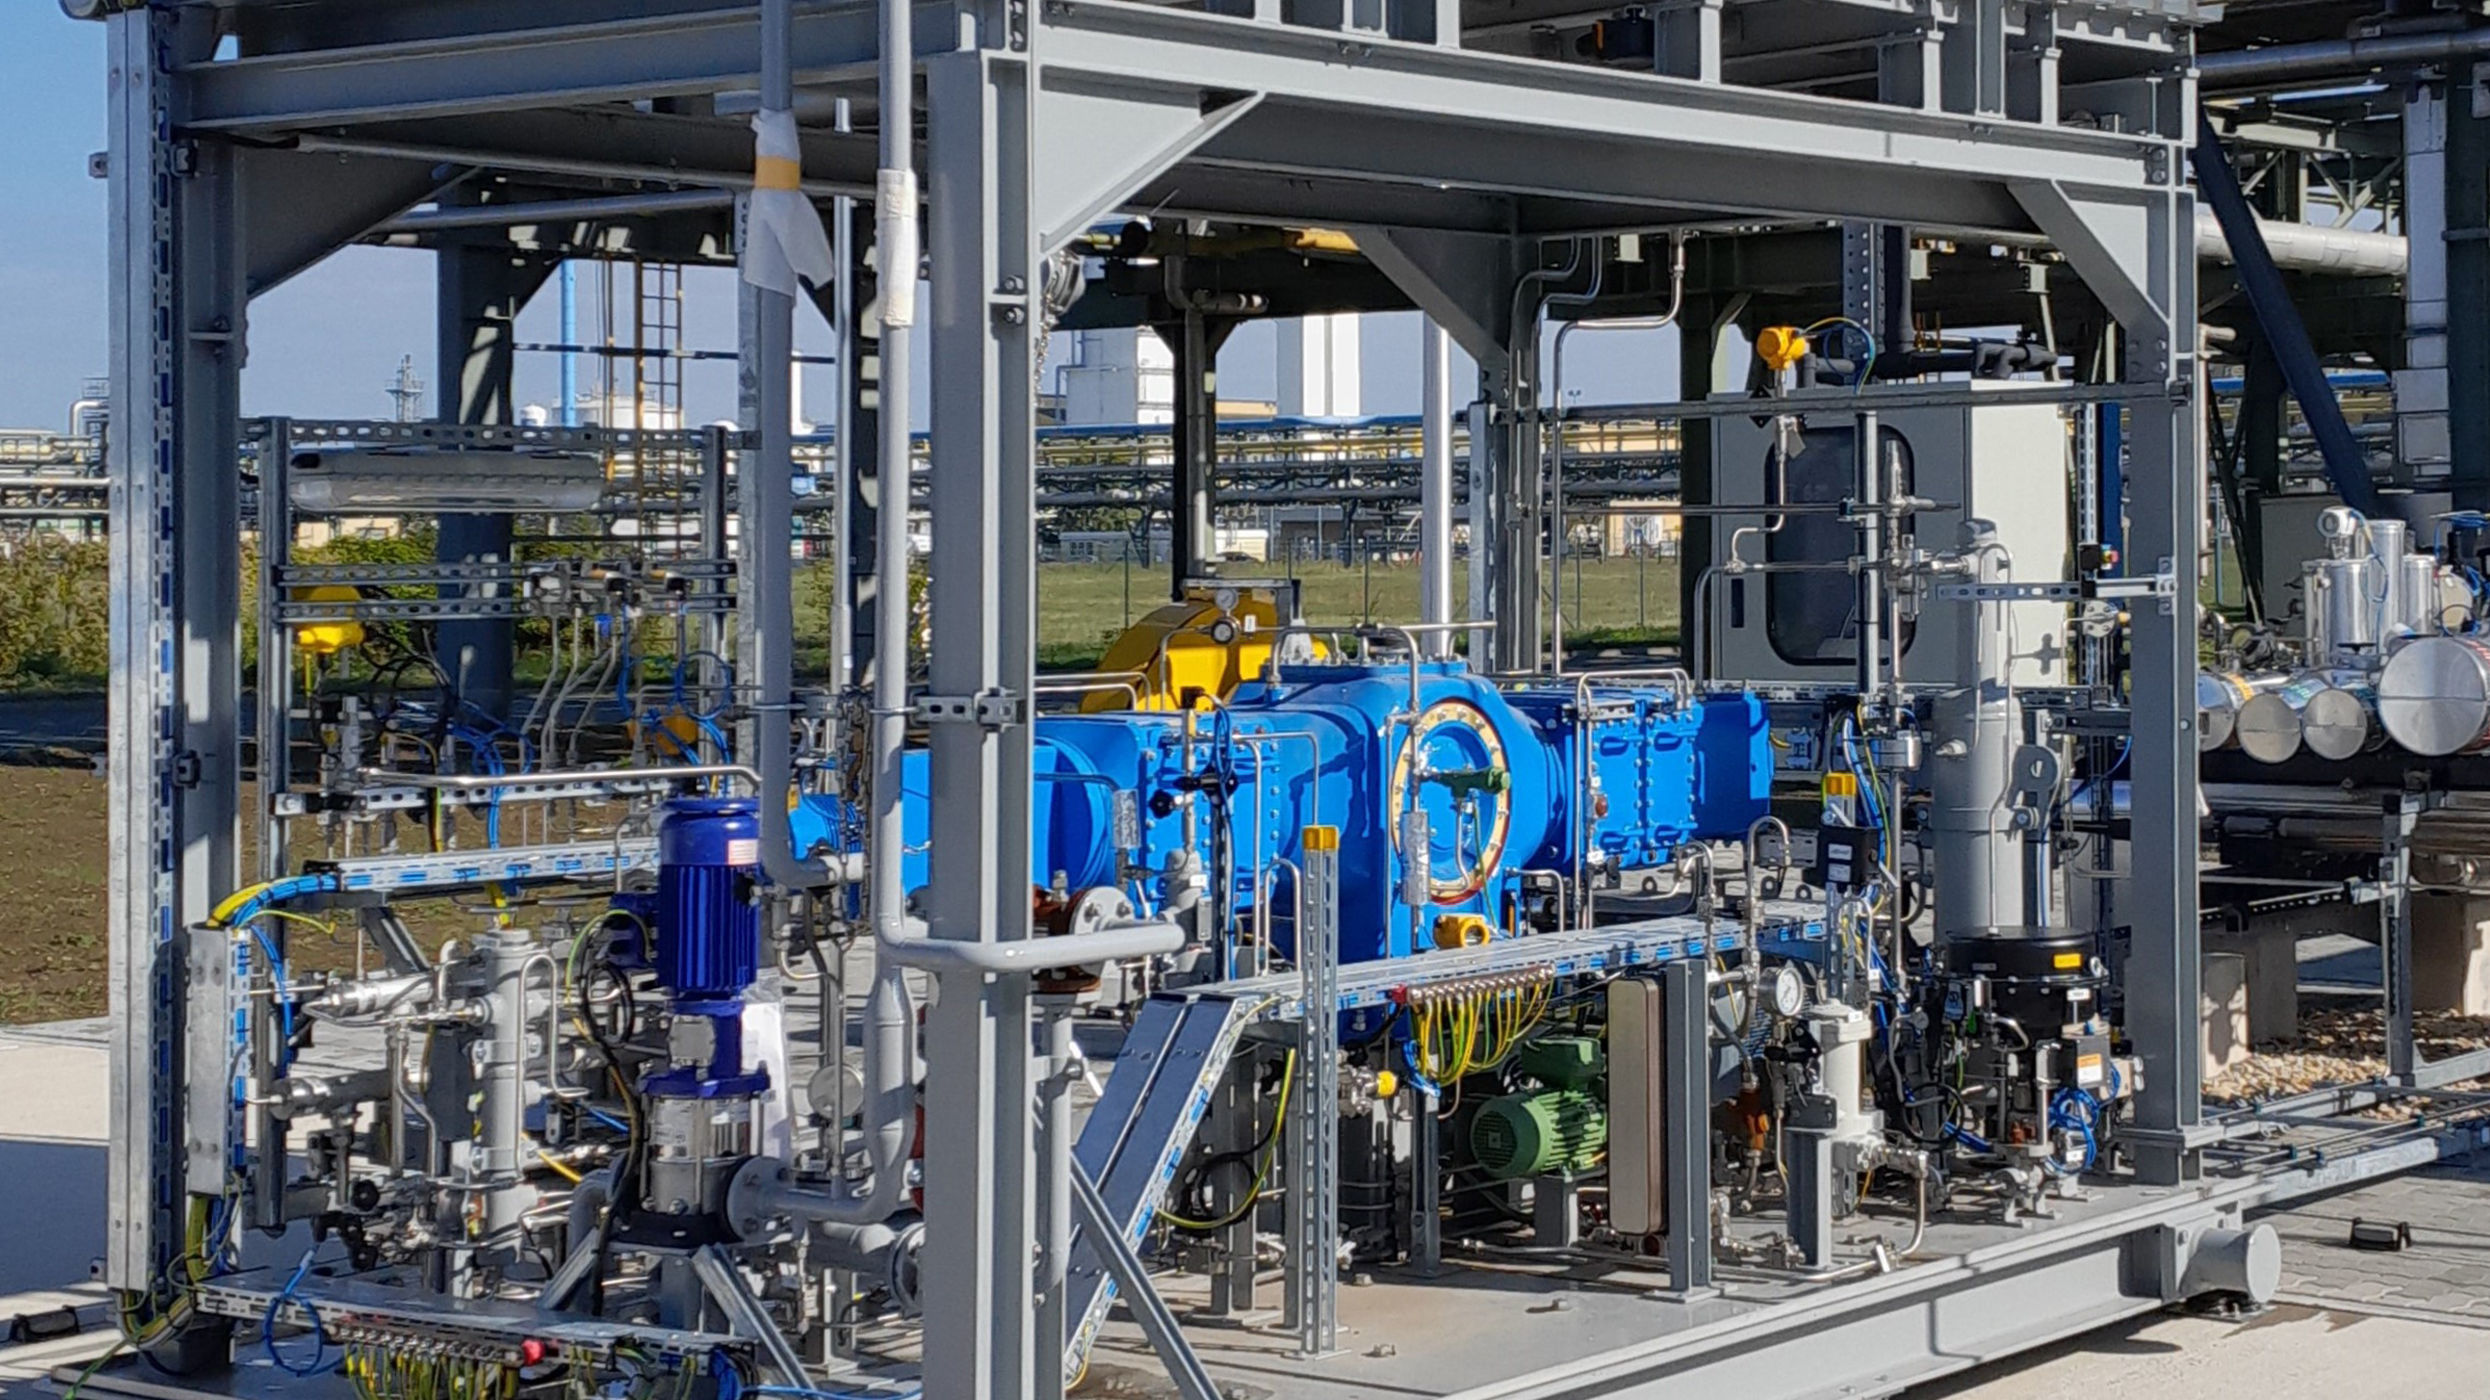 MegaLyseurPlus research project for the industrial production of hydrogen on the test field of a refinery